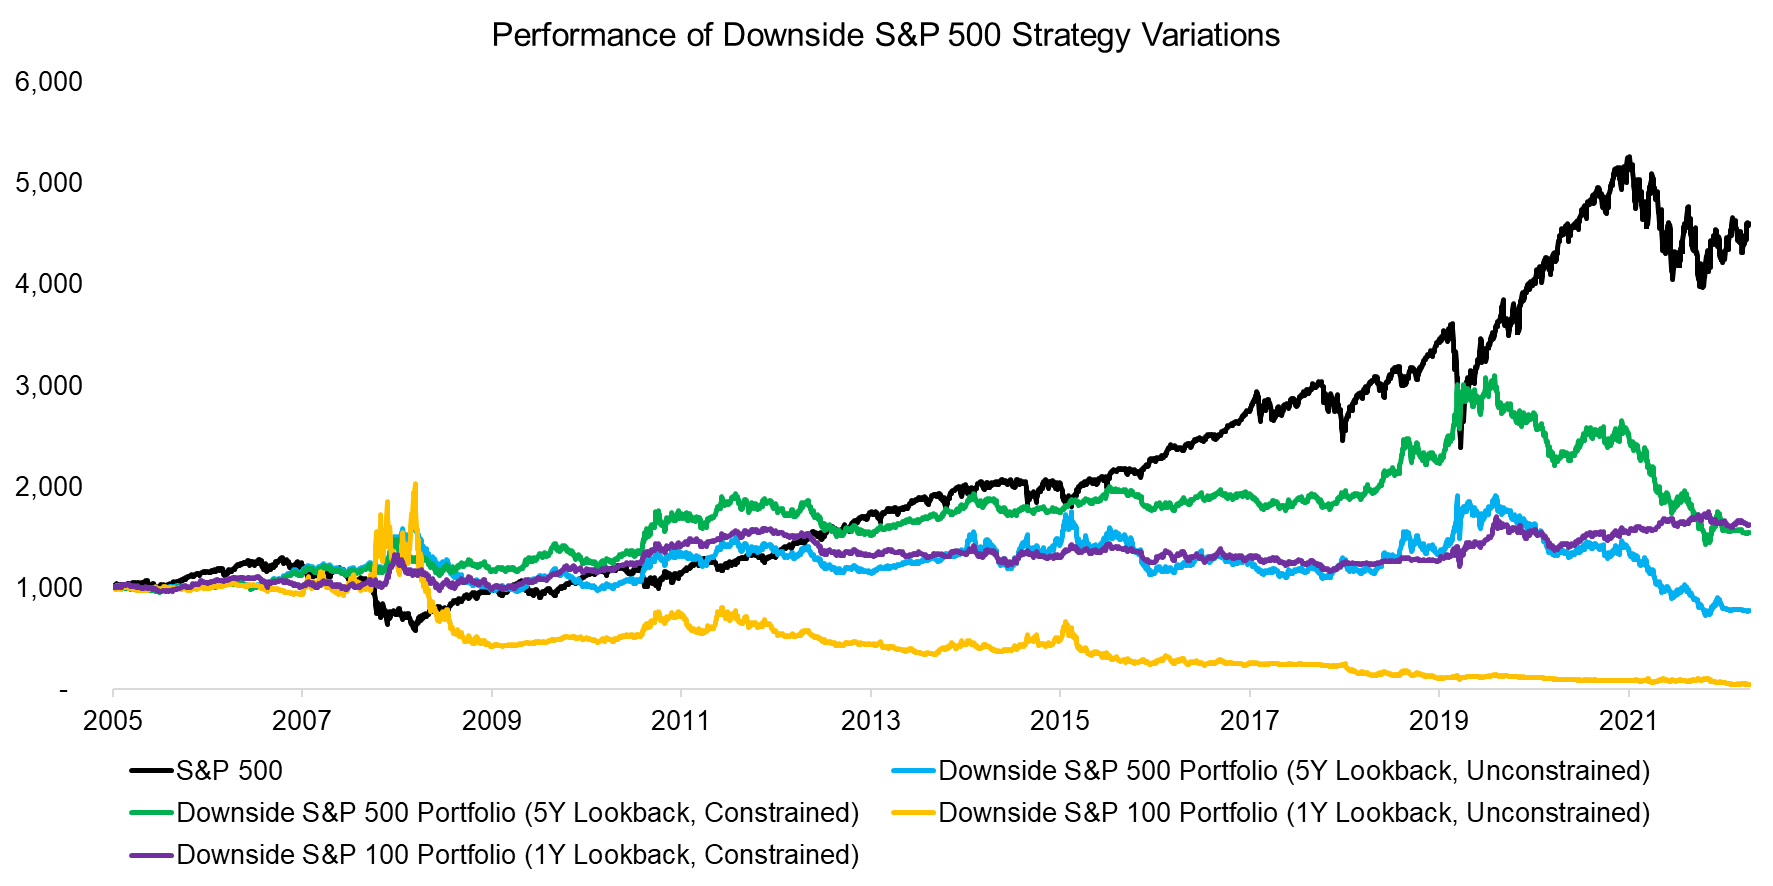 Performance of Downside S&P 500 Strategy Variations